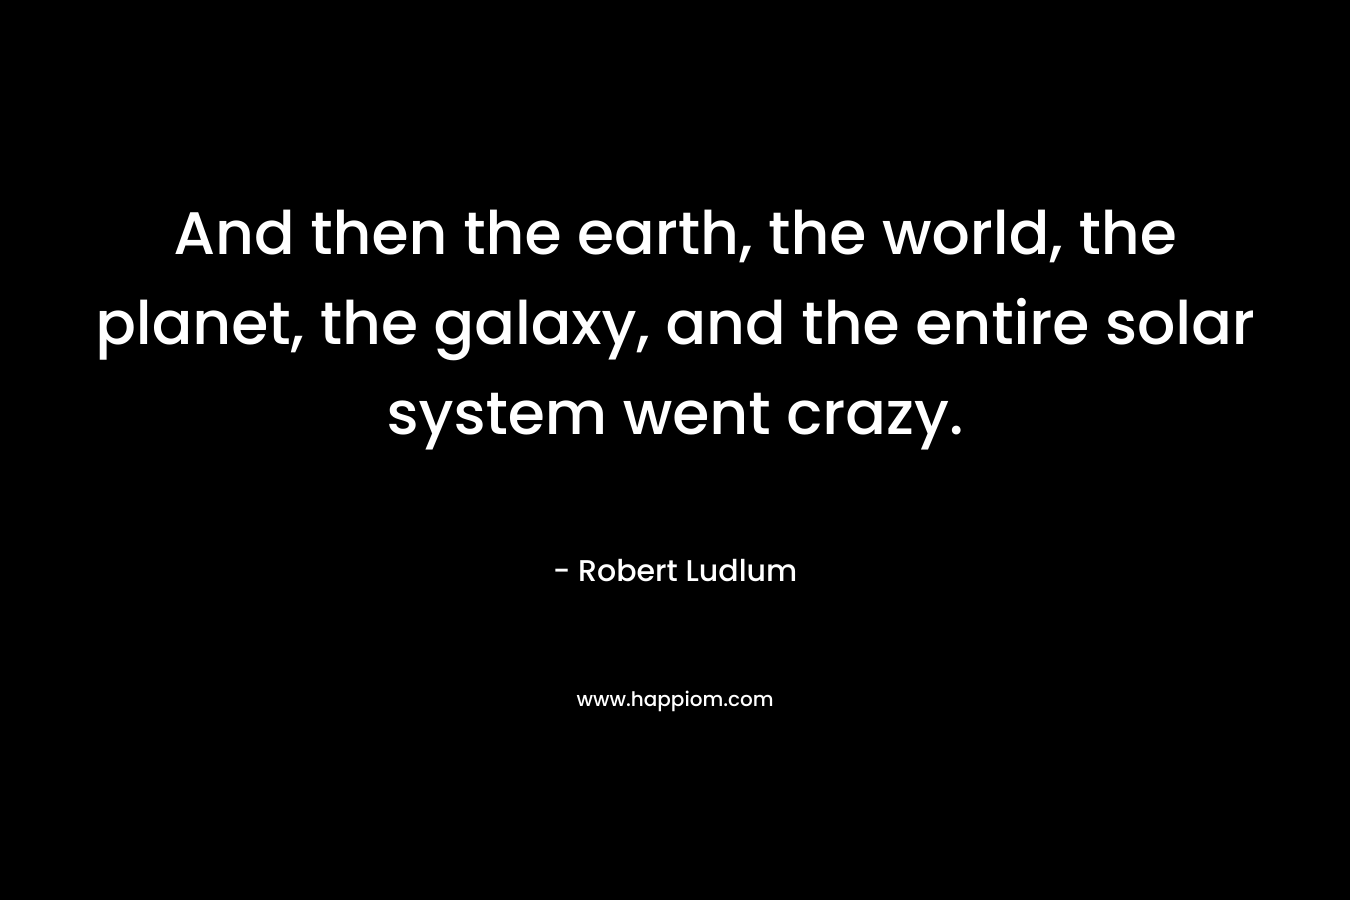 And then the earth, the world, the planet, the galaxy, and the entire solar system went crazy. – Robert Ludlum